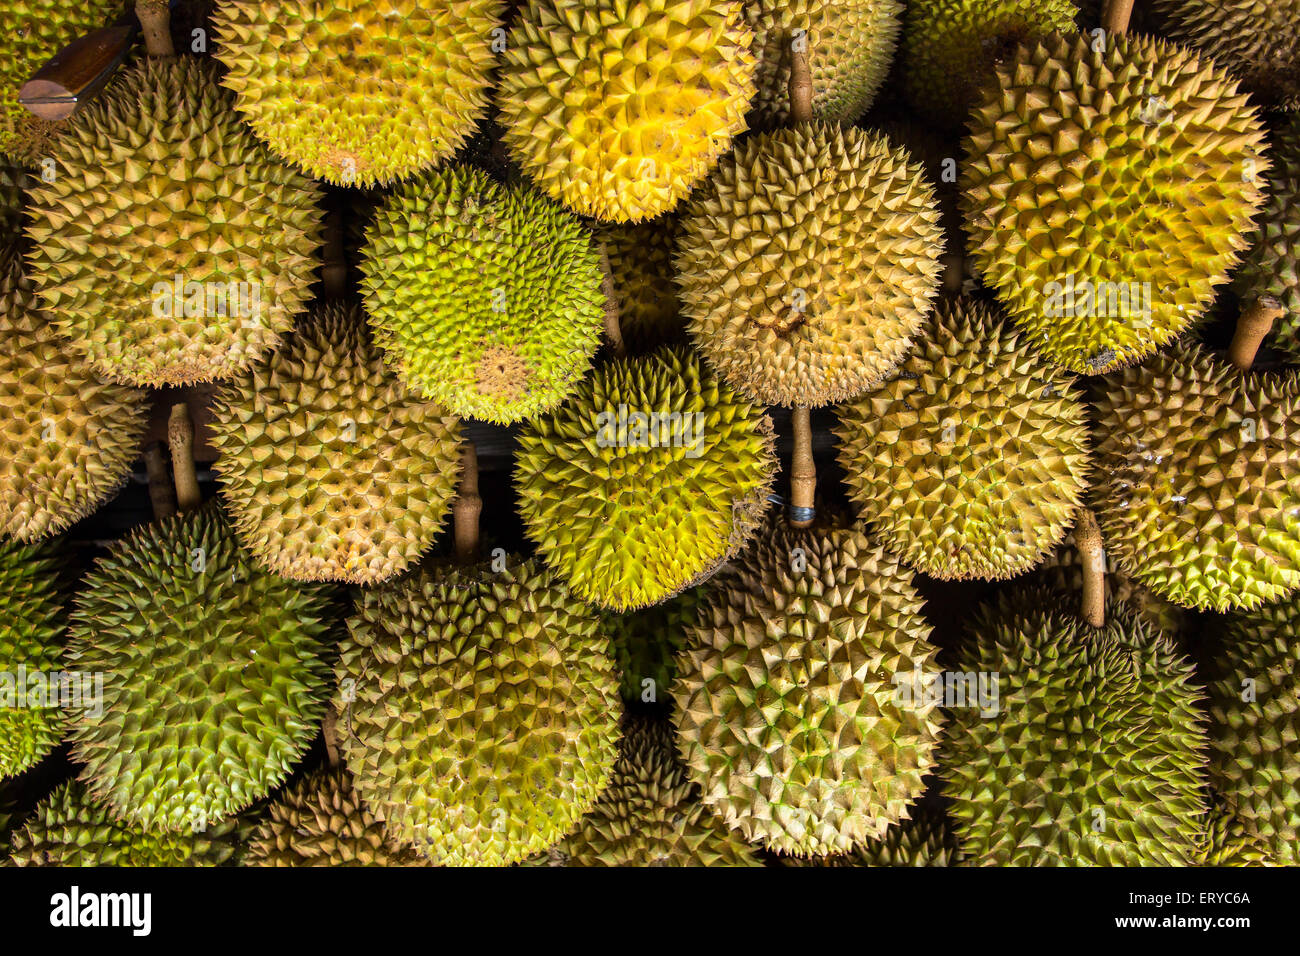 Durian fruits on the market Stock Photo